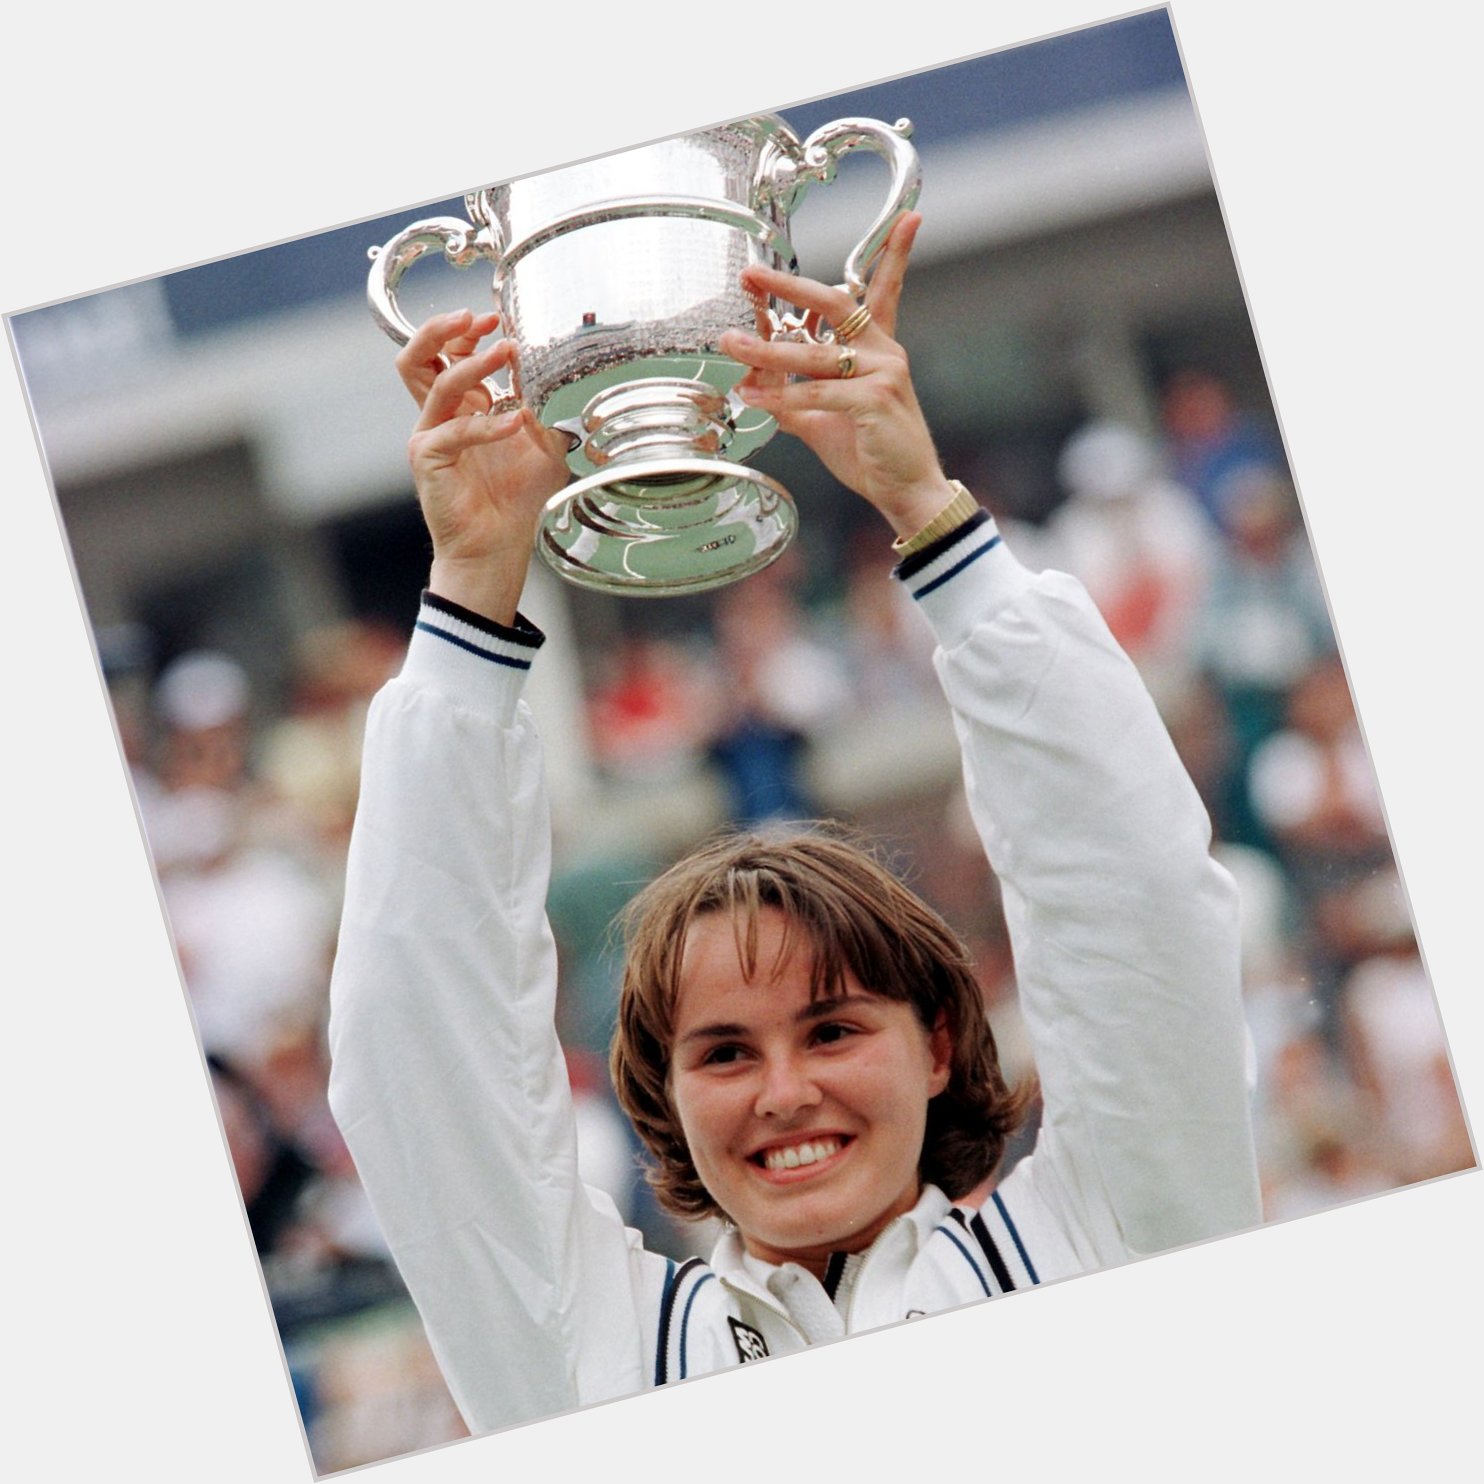 \97 singles  \17 doubles Martina Hingis made her share of memories in New York.

Happy birthday,  